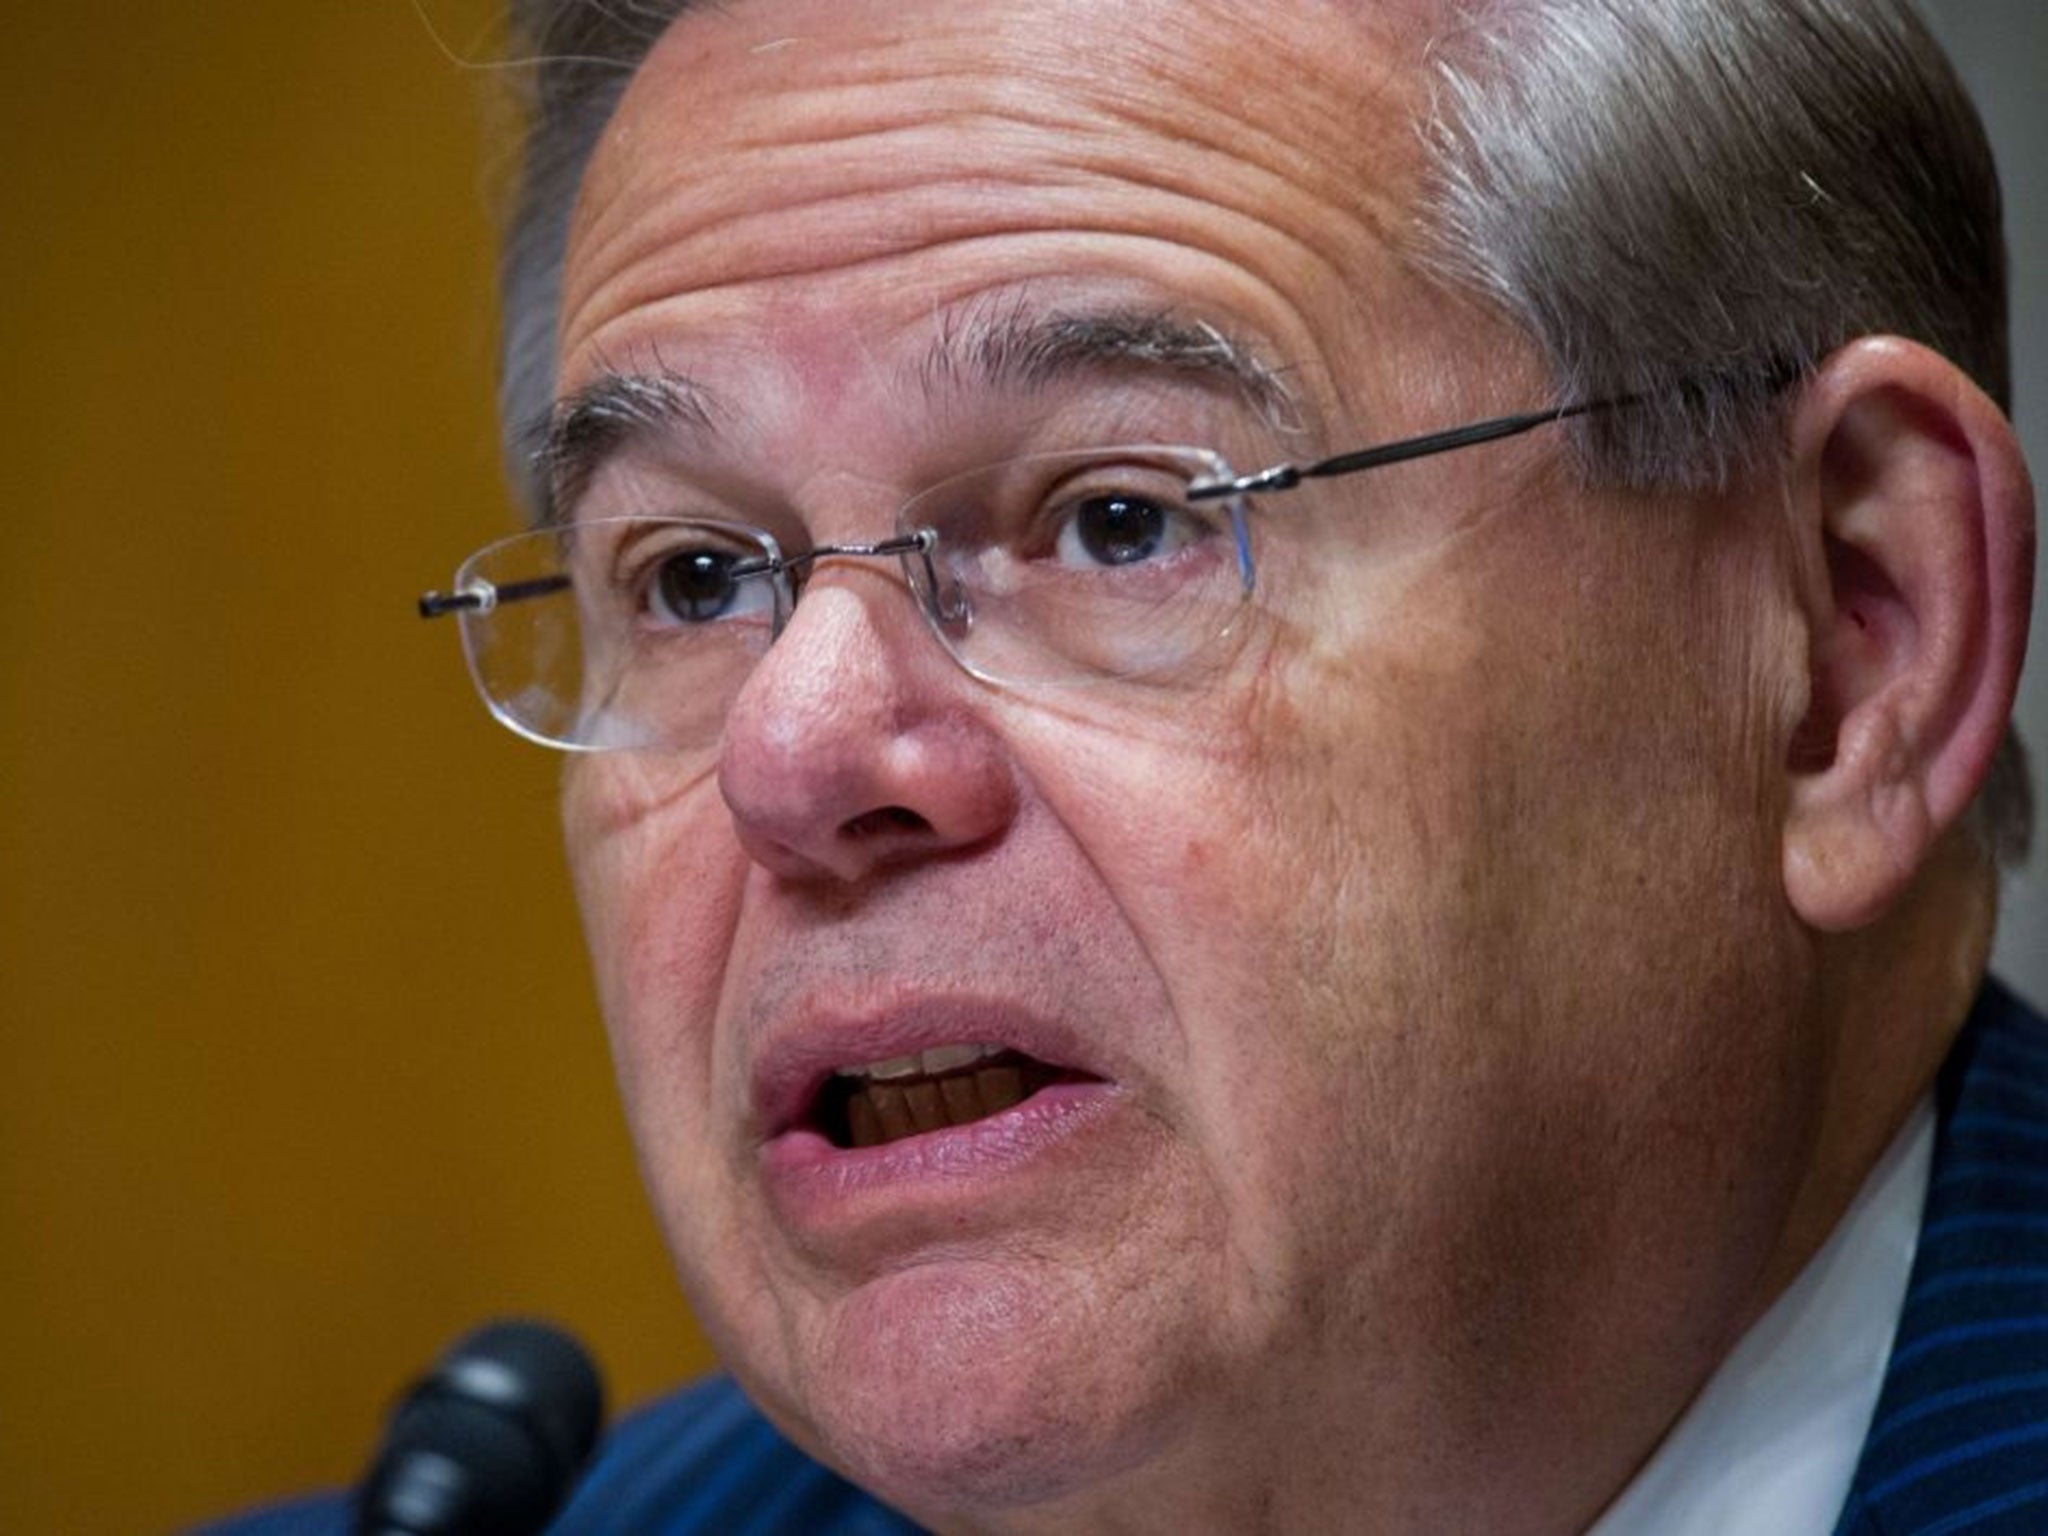 US Senator Robert Menendez, D-NJ, Chairman of the Senate Foreign Relations Committee making opening remarks at the start of a congressional hearing in Washington, DC. Menendez was indicted on charges of public corruption.